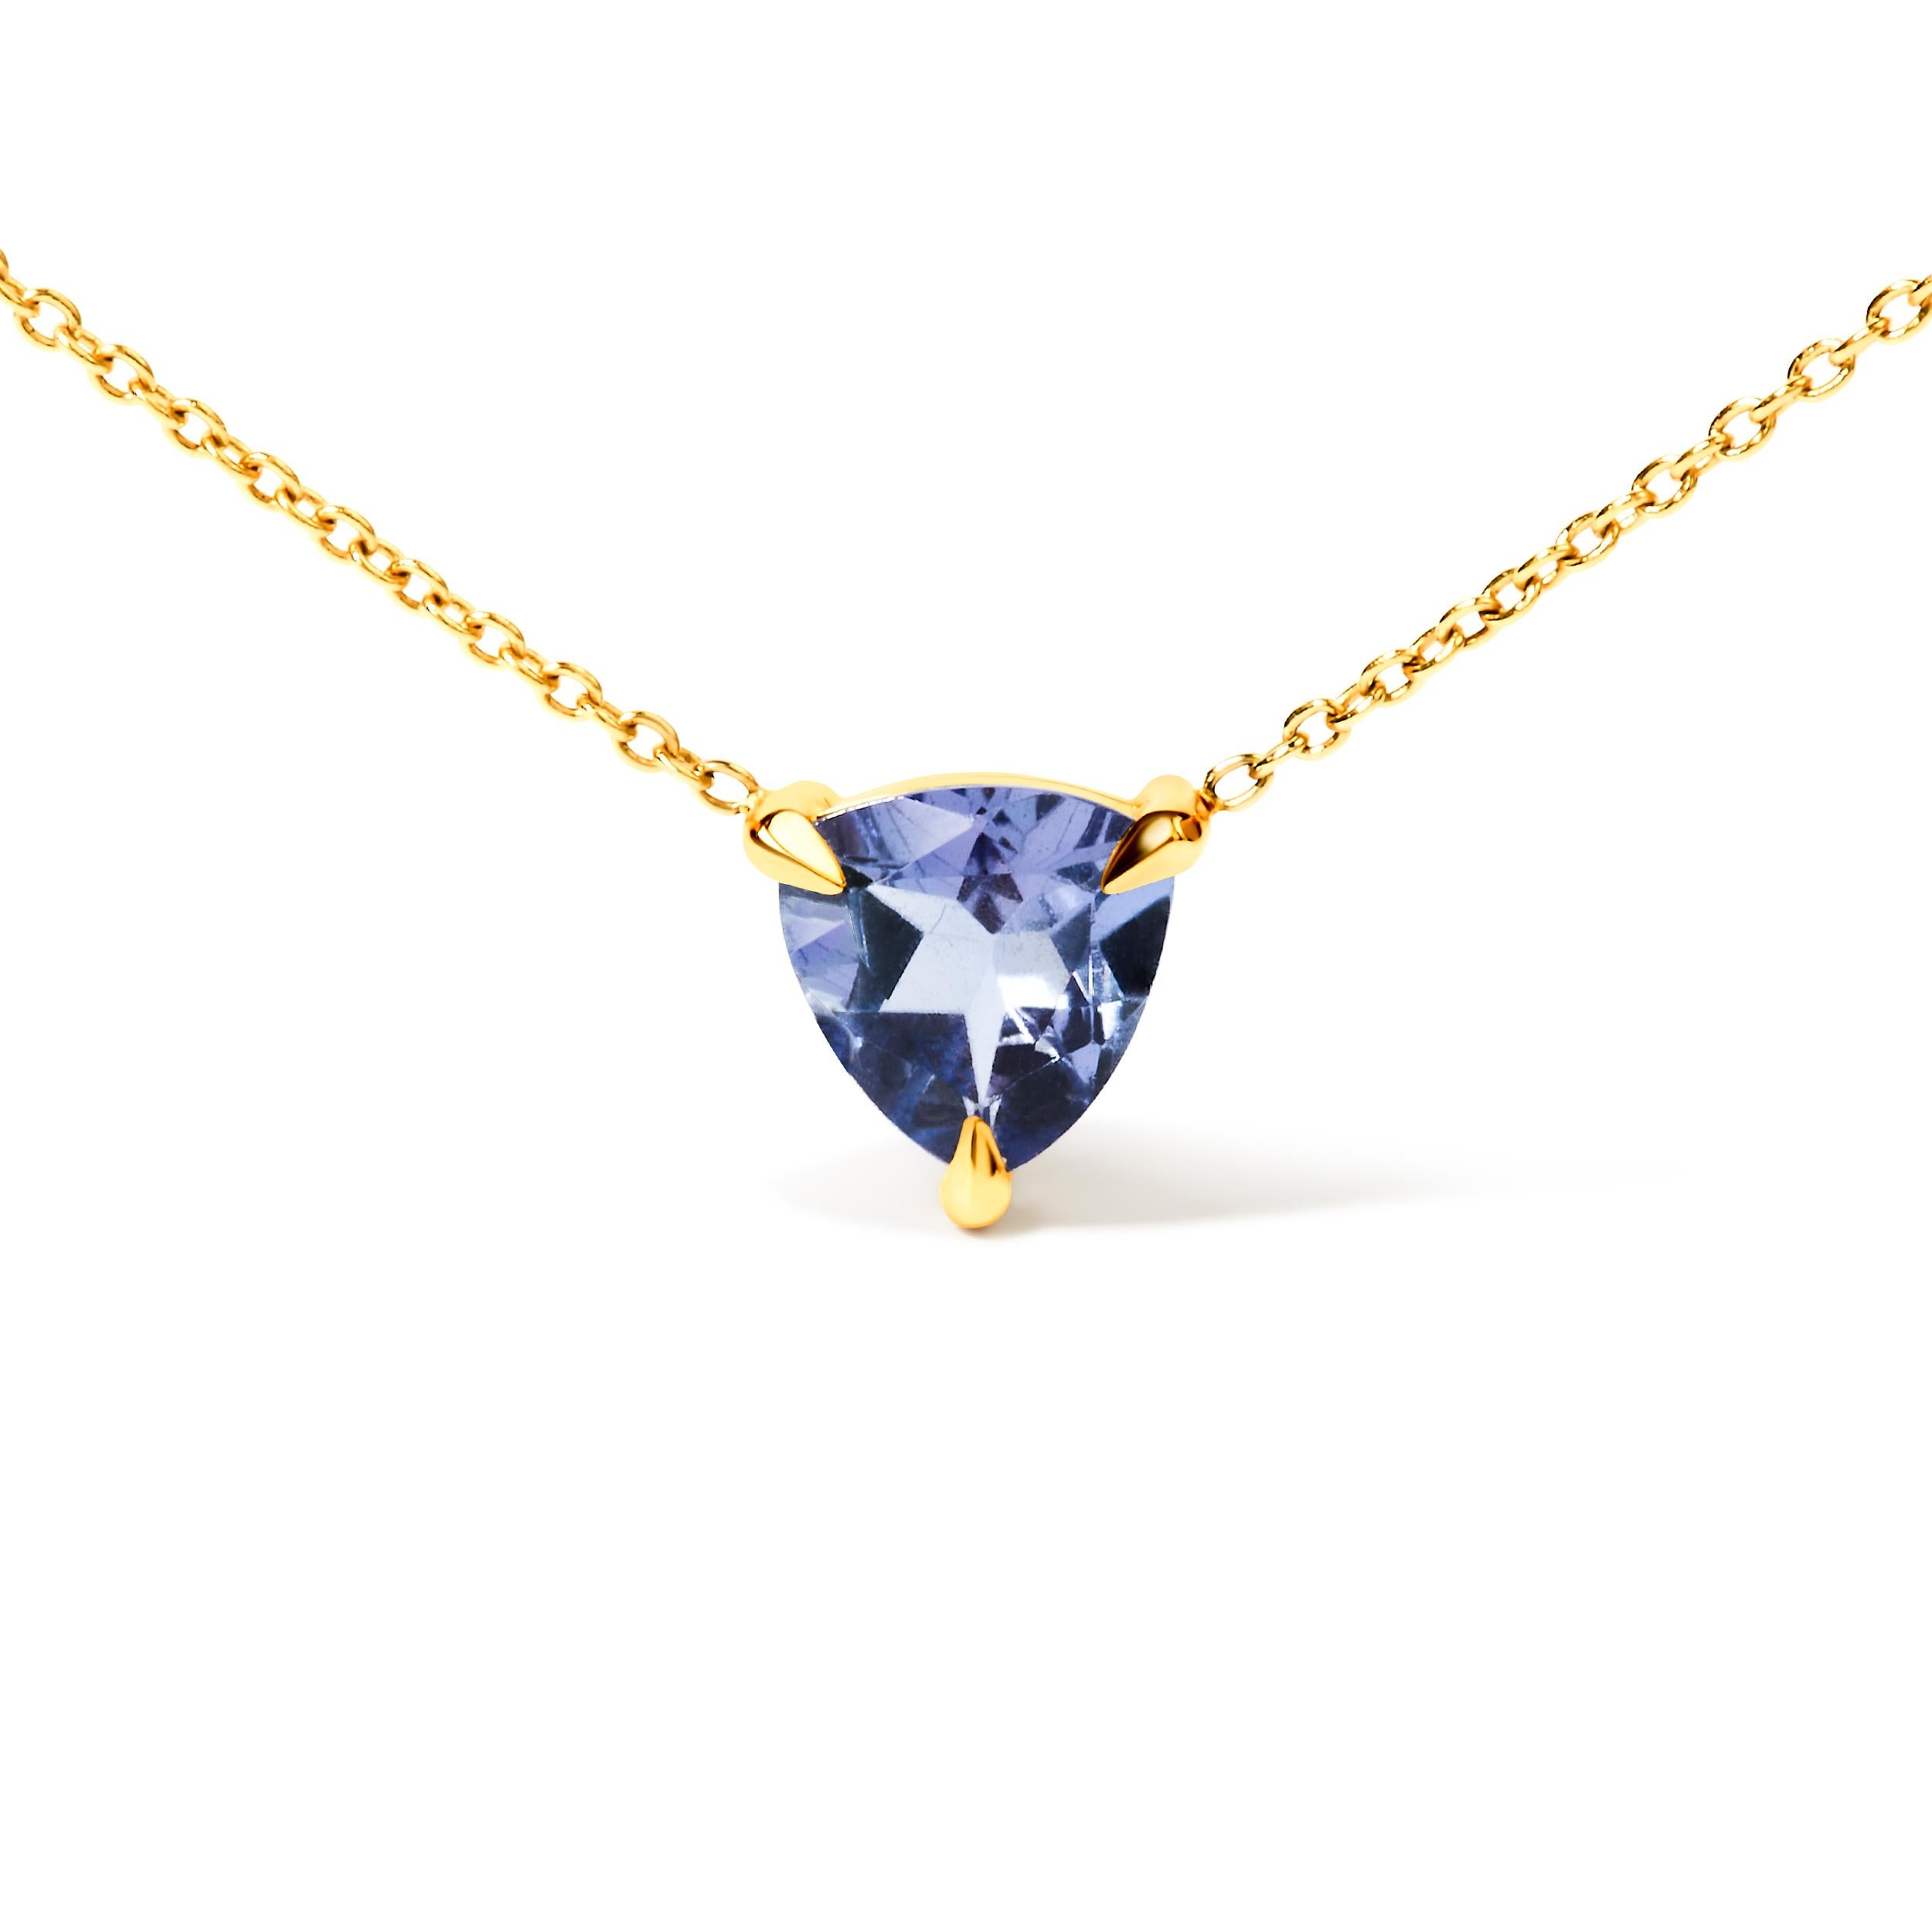 Immerse yourself in the allure of our 14K Yellow Gold 3-Prong Martini Set Blue Tanzanite Trillion Solitaire Pendant Necklace, a masterpiece of timeless beauty. Crafted from exquisite 14K yellow gold, this necklace features a stunning 7 x 6.5 mm